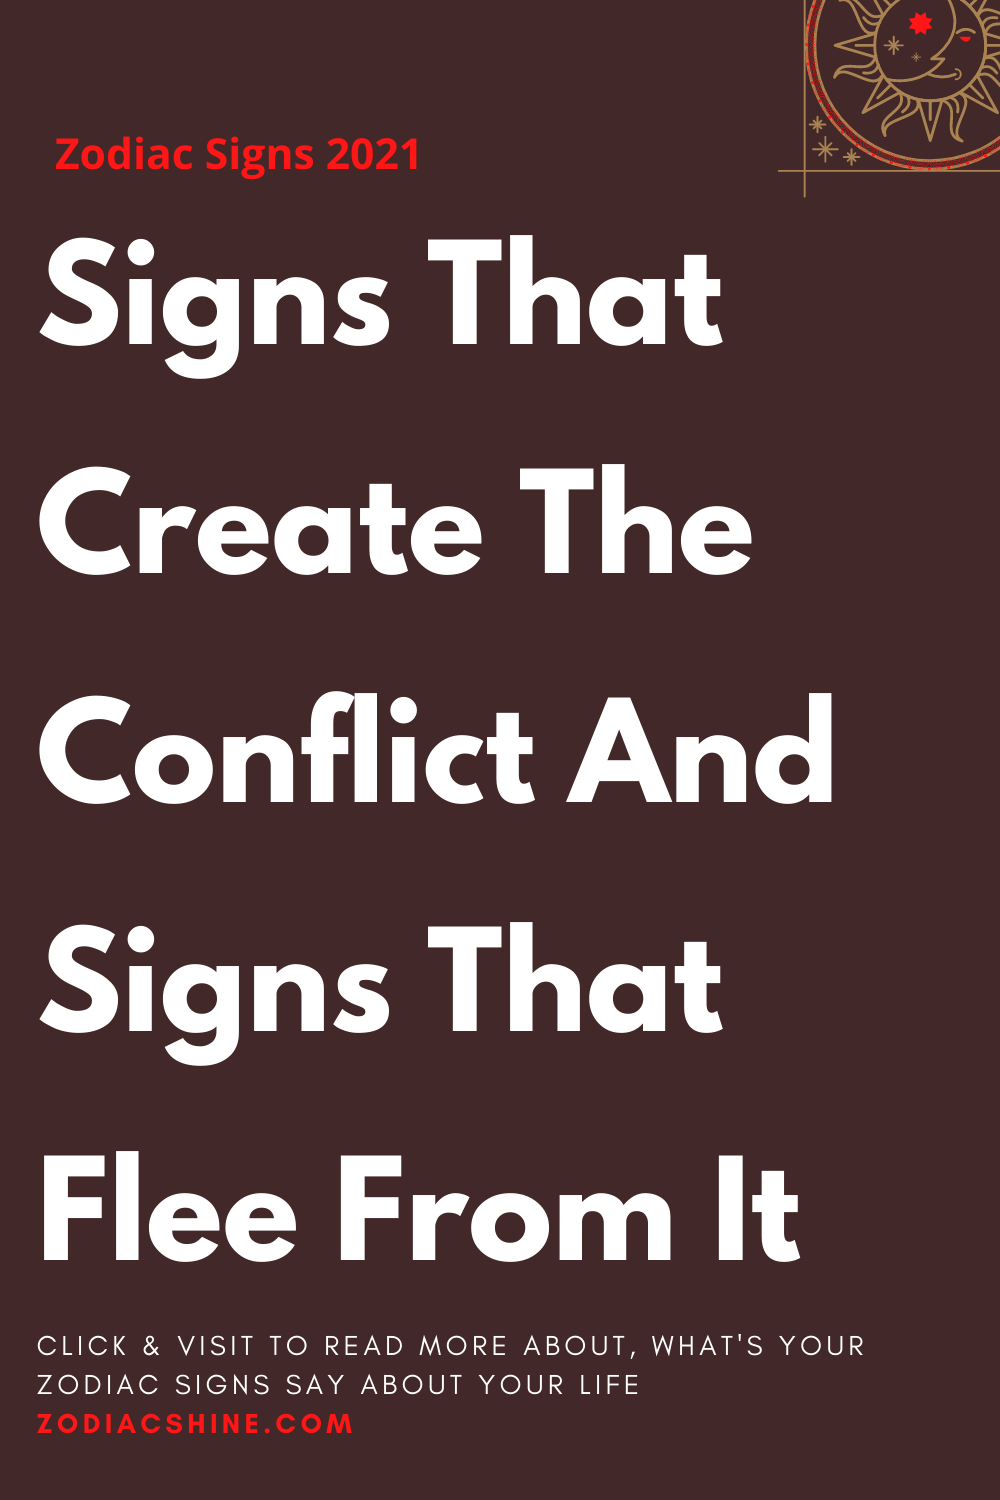 Signs That Create The Conflict And Signs That Flee From It